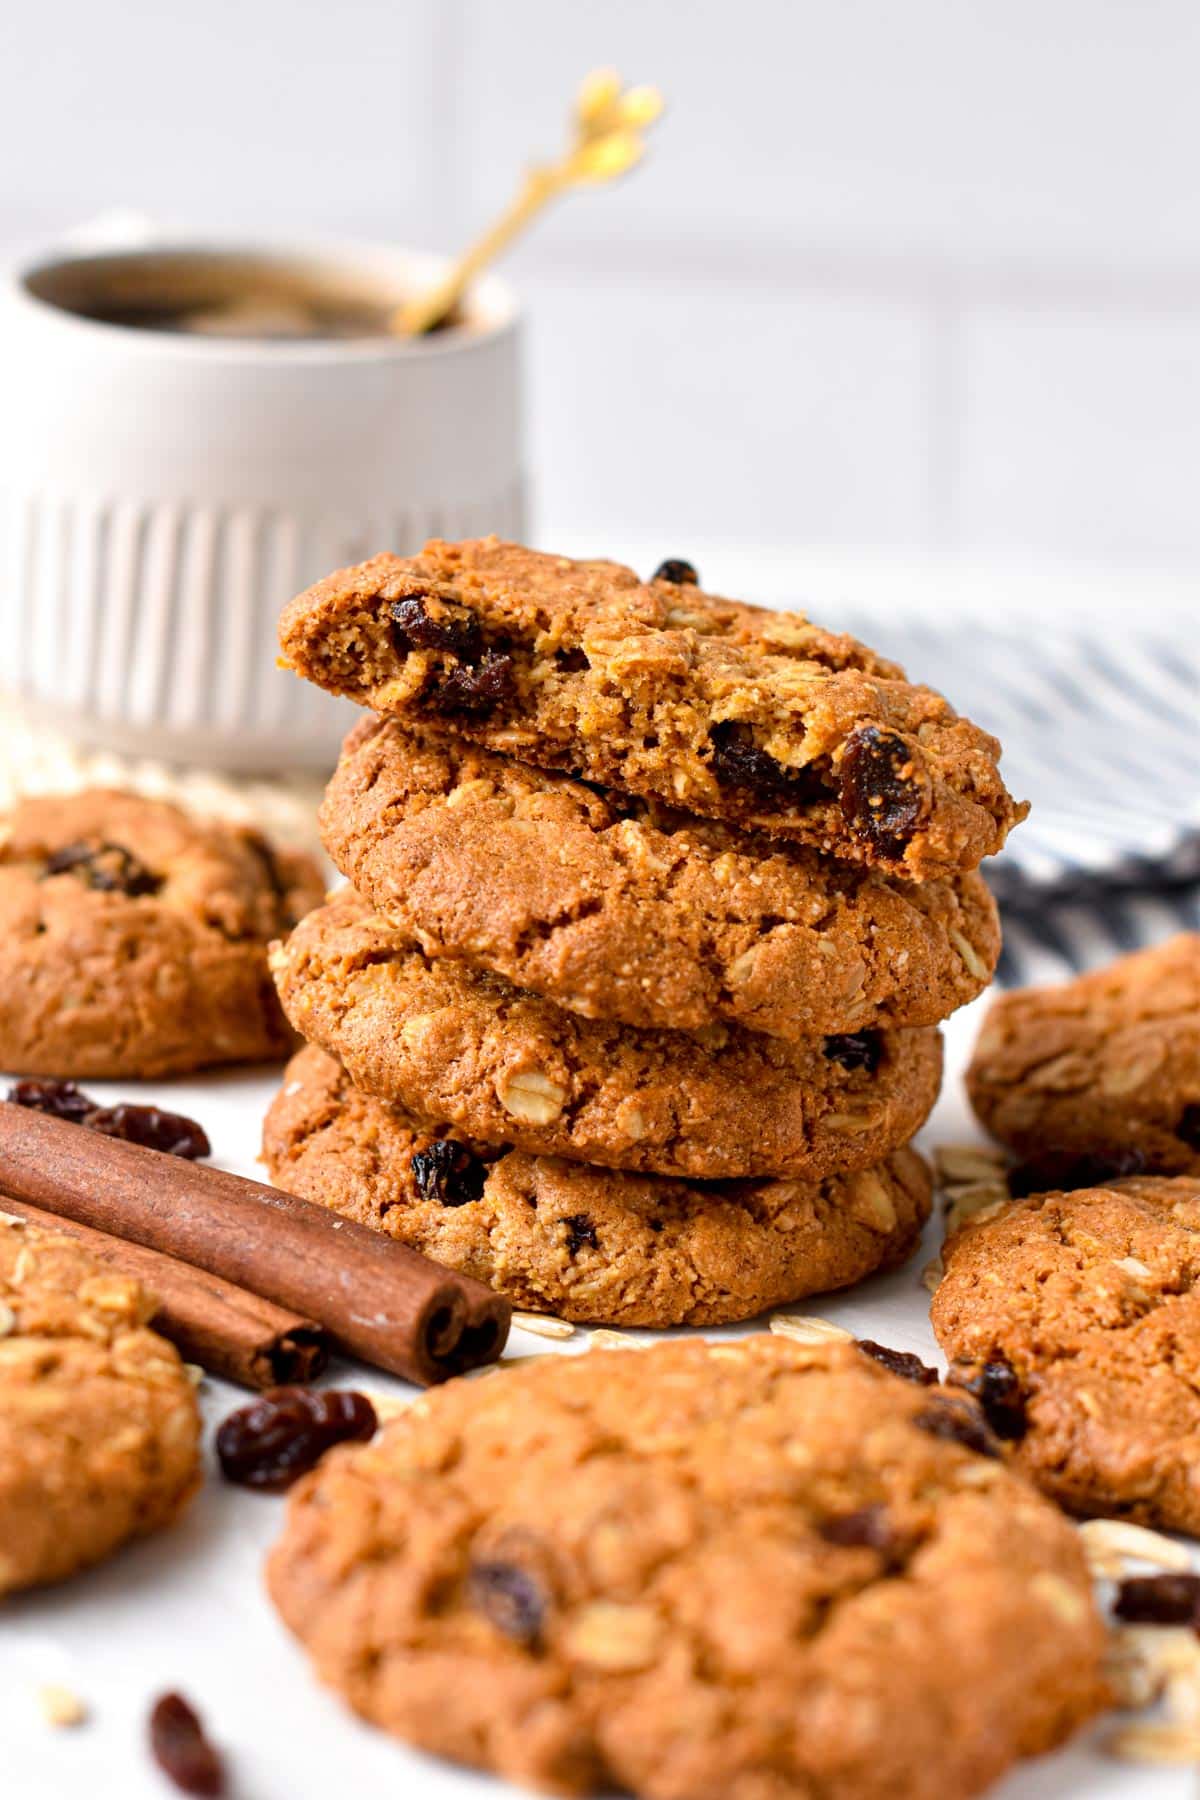 These Vegan Gluten Free Oatmeal Cookies are crispy, chewy vegan breakfast cookies made with naturally gluten-free ingredients. They are packed with fiber, proteins and a delicious way to starts your day.